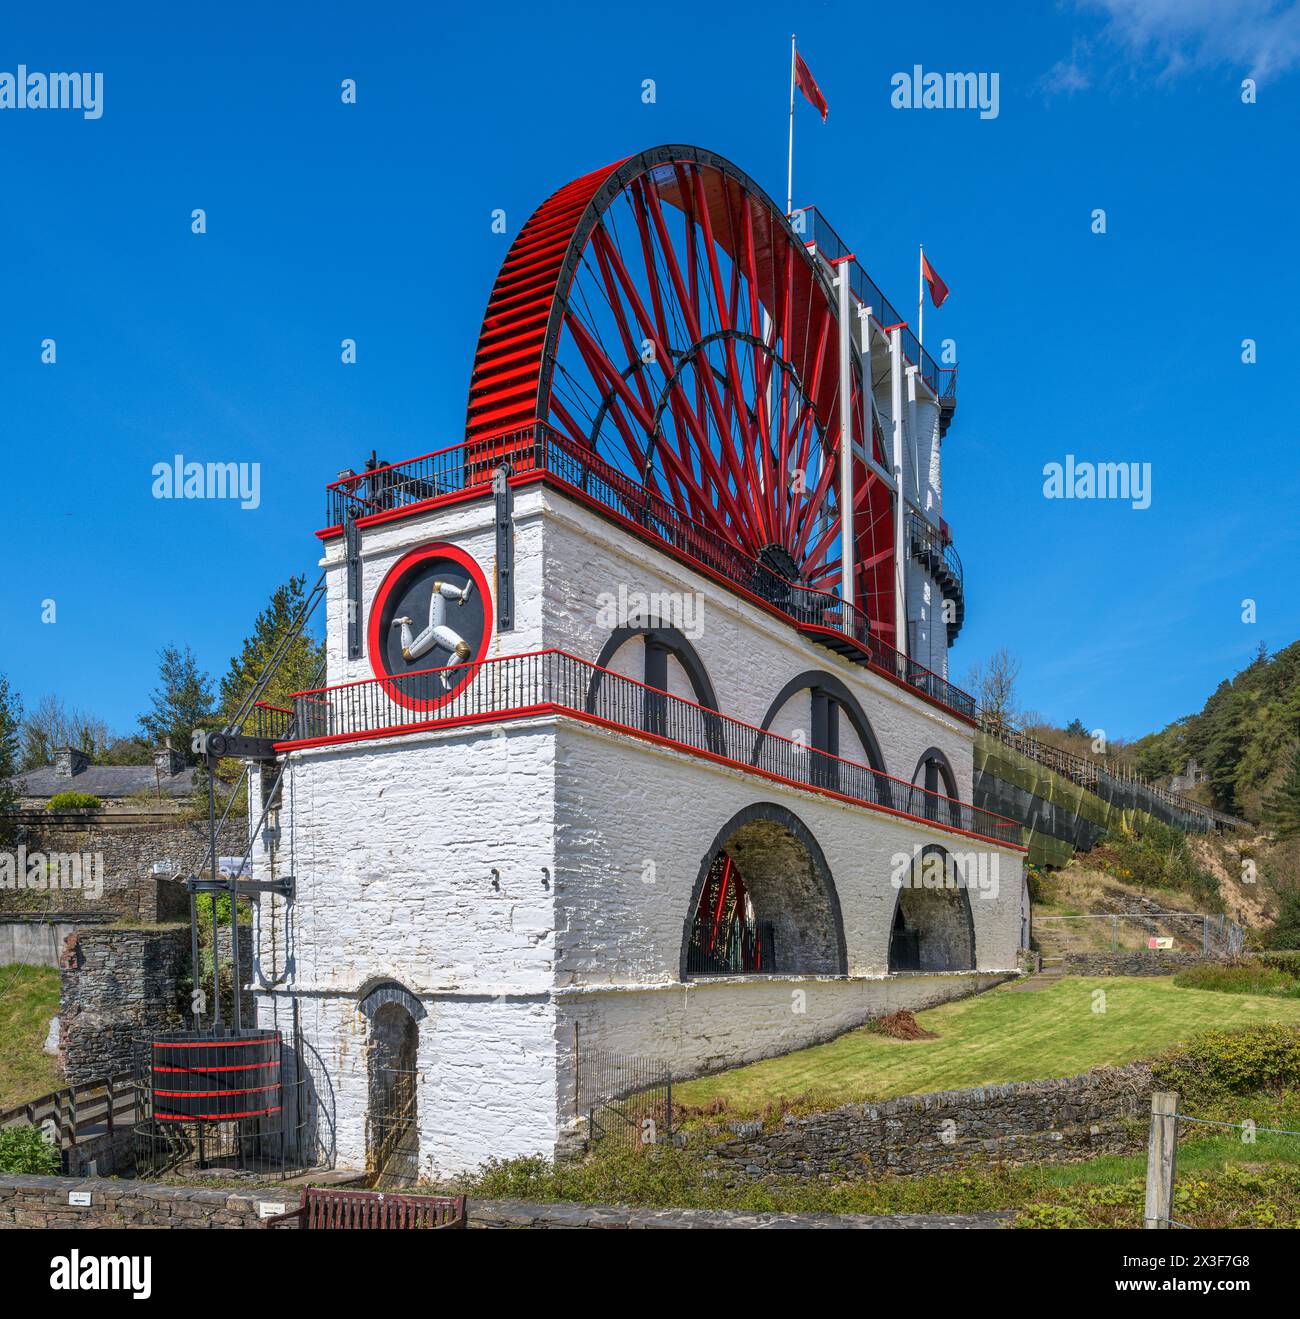 Laxey Wheel. The Great Laxey Wheel or the Lady Isabella Wheel, a giant water wheel in Laxey , Isle of Man, England, UK Stock Photo